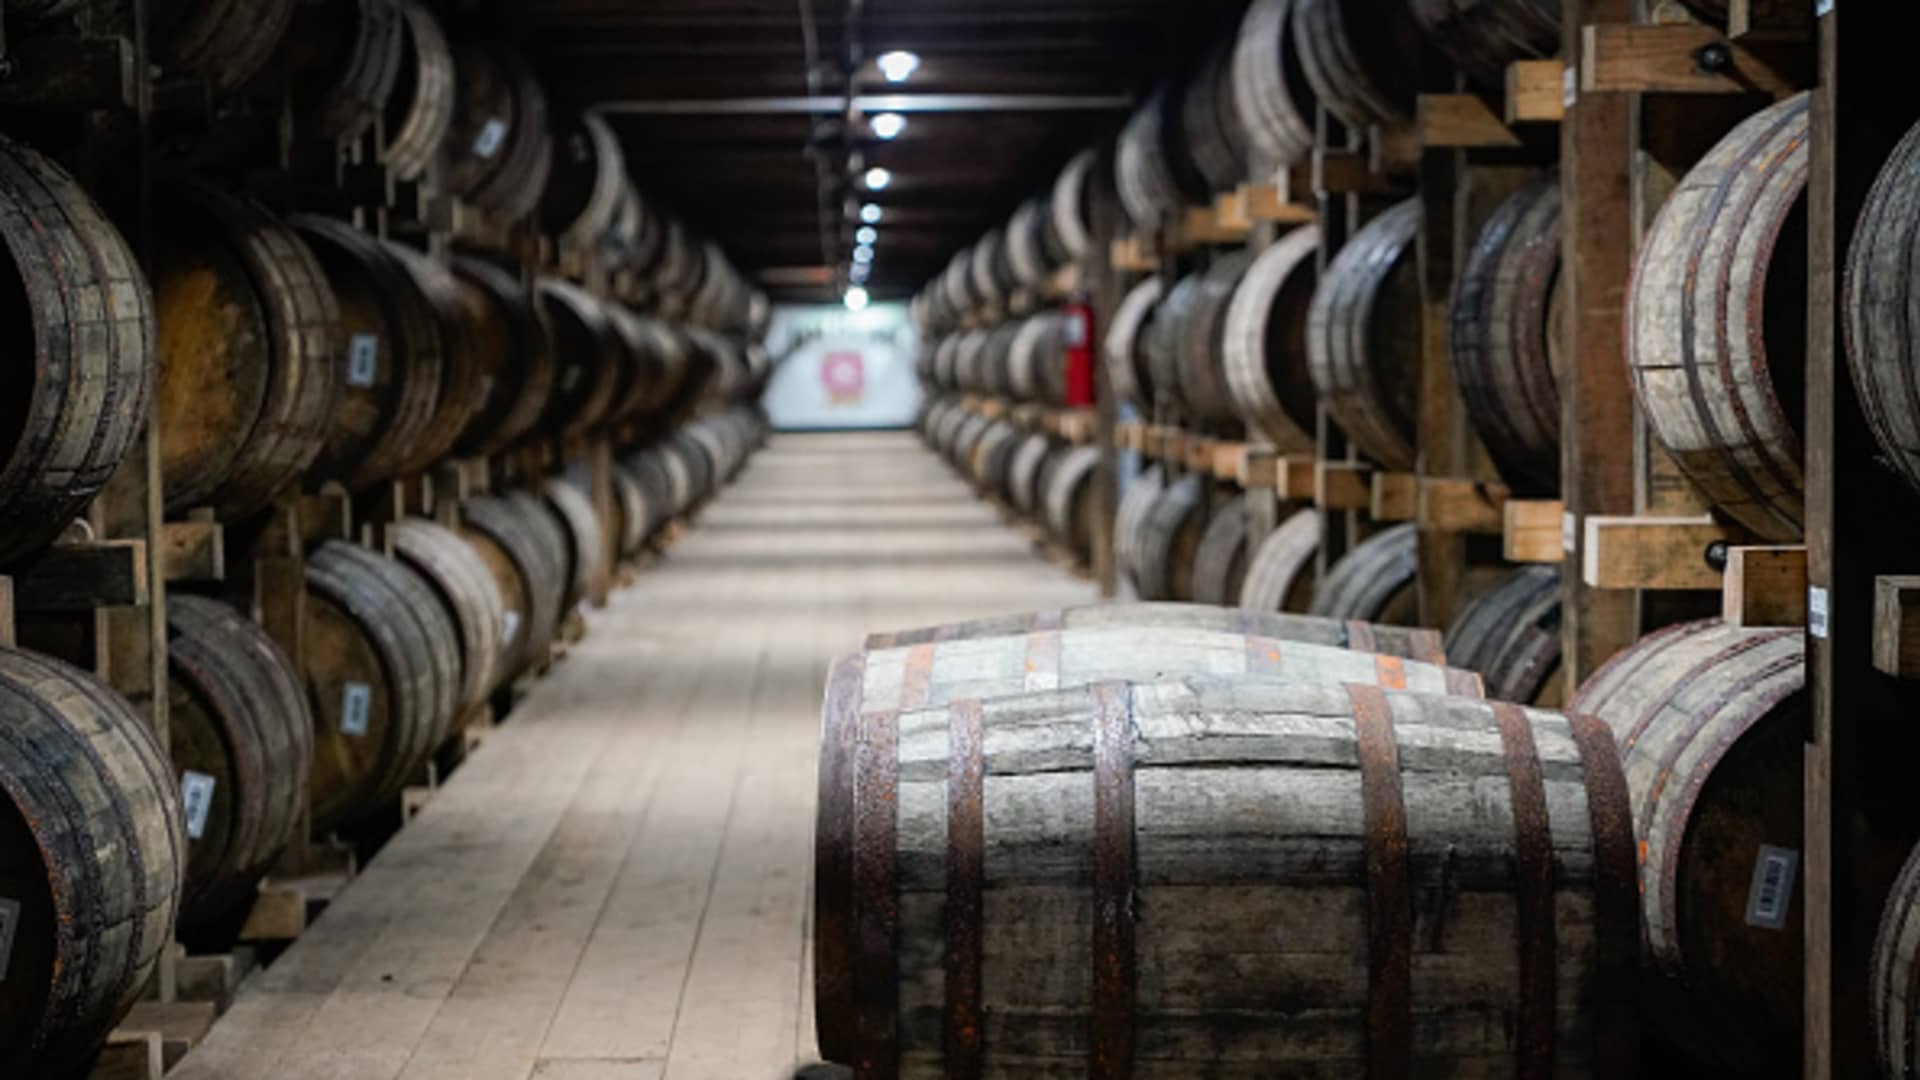 Barrels of bourbon are stacked in a barrel house at the Jim Beam Distillery on February 17, 2020 in Clermont, Kentucky.